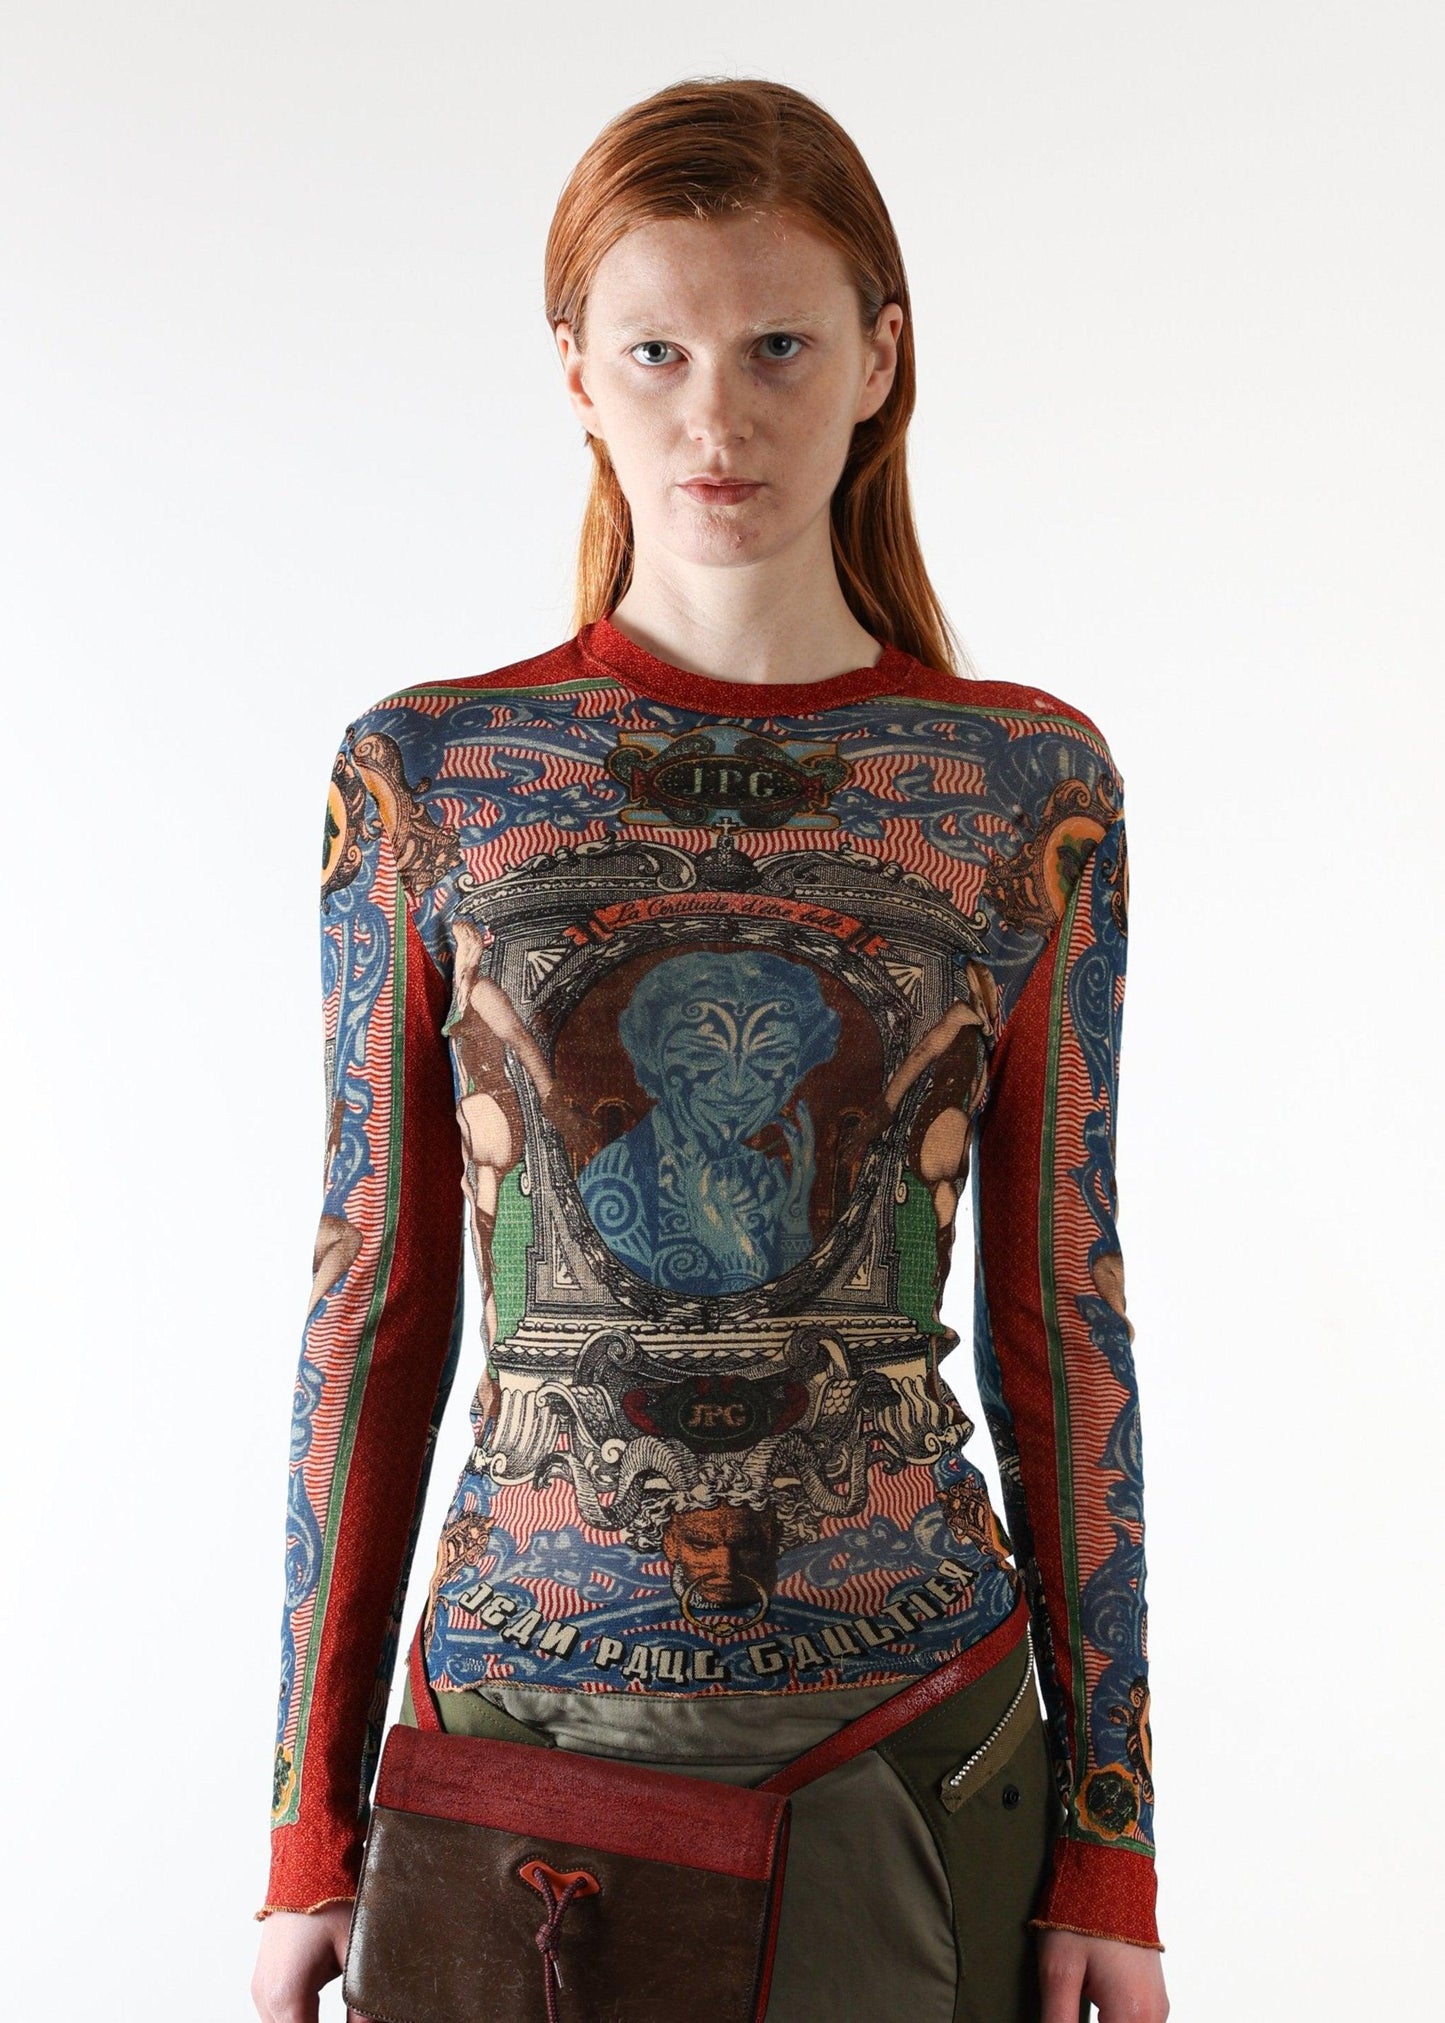 Jaul Pean Gaultier Tattoo Mesh Top - Known Source